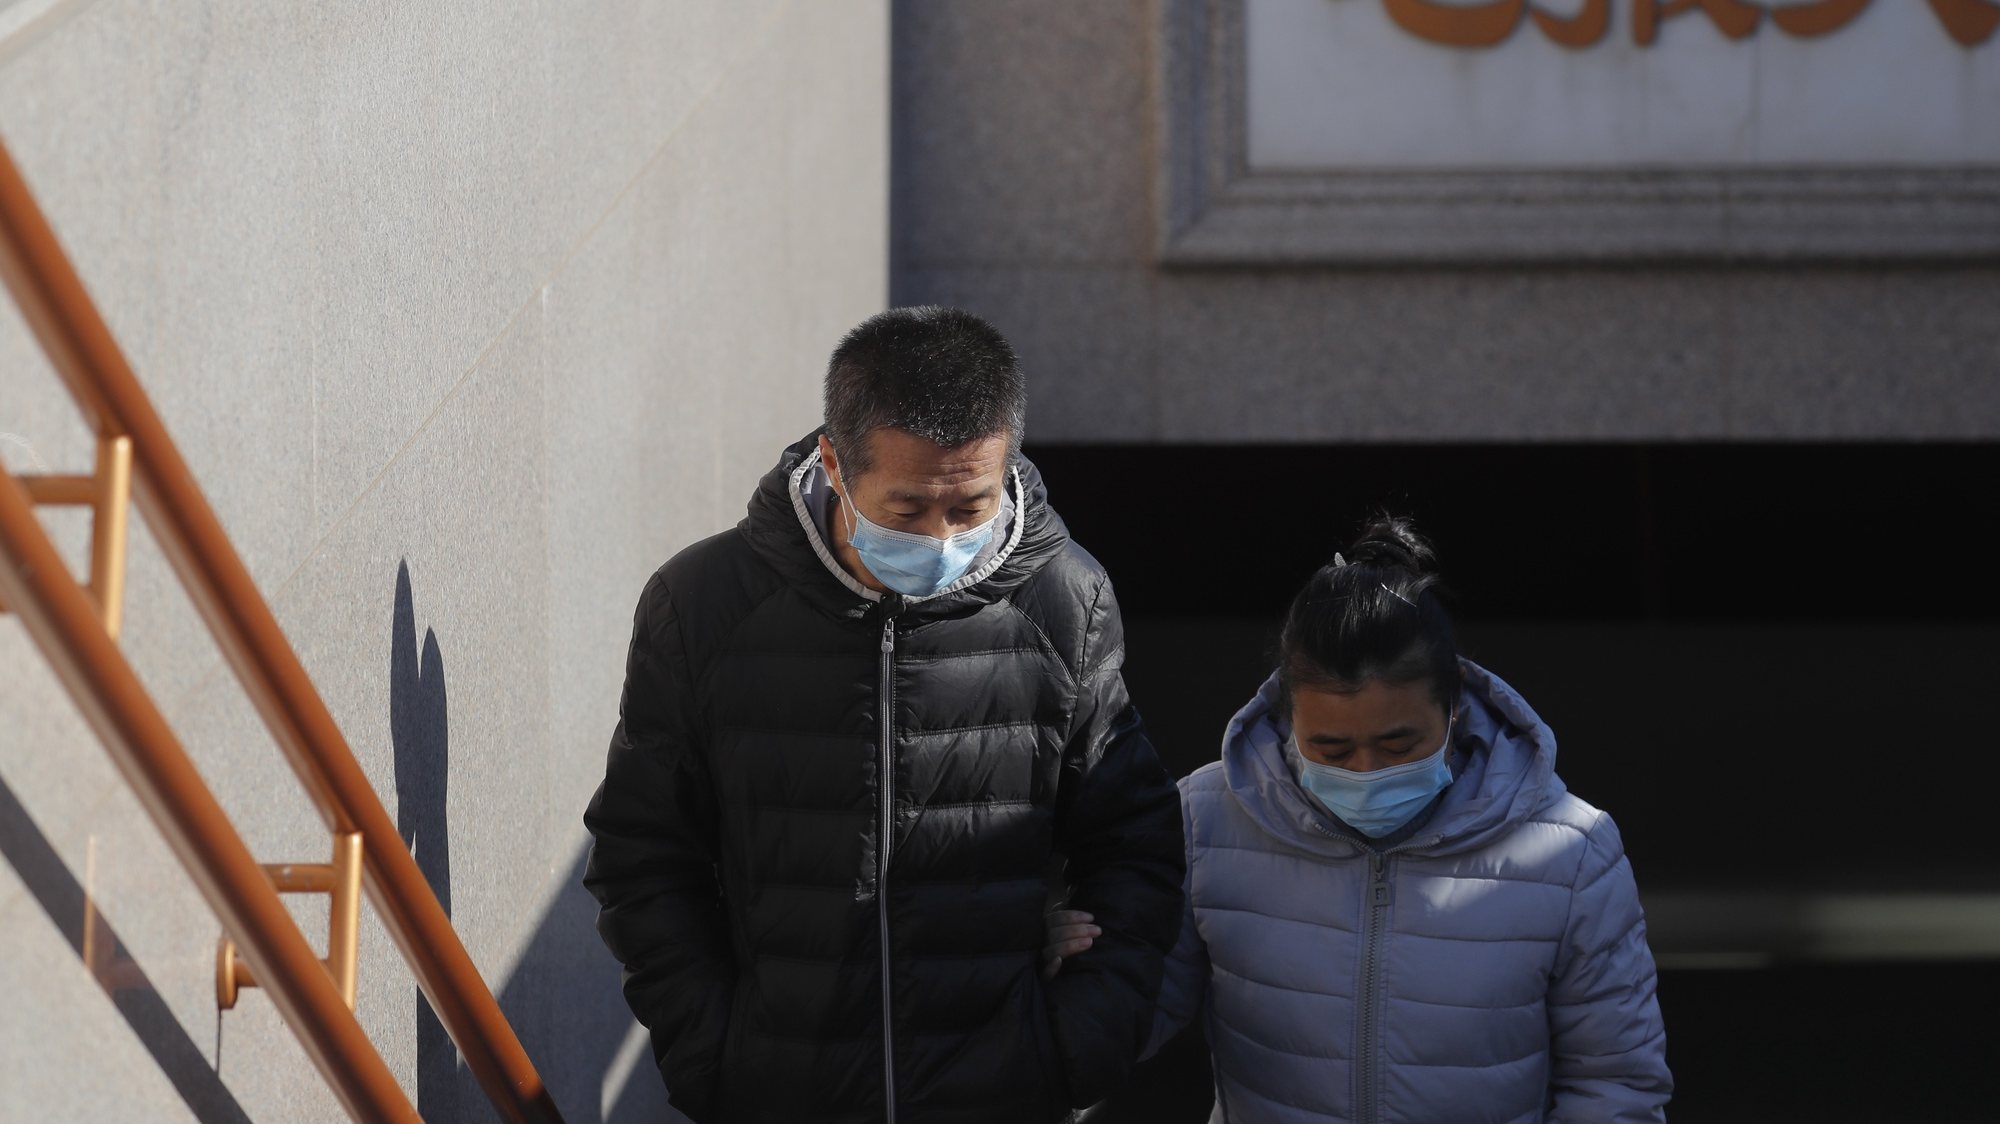 epa08892973 People wearing protective face masks walk out of an underpass in Beijing, China, 19 December 2020. China reported 17 newly confirmed coronavirus disease (COVID-19) cases on Chinese mainland on 18 December, including three domestically transmitted cases, two of which in Beijing, according to China&#039;s National Health Commission.  EPA/WU HONG